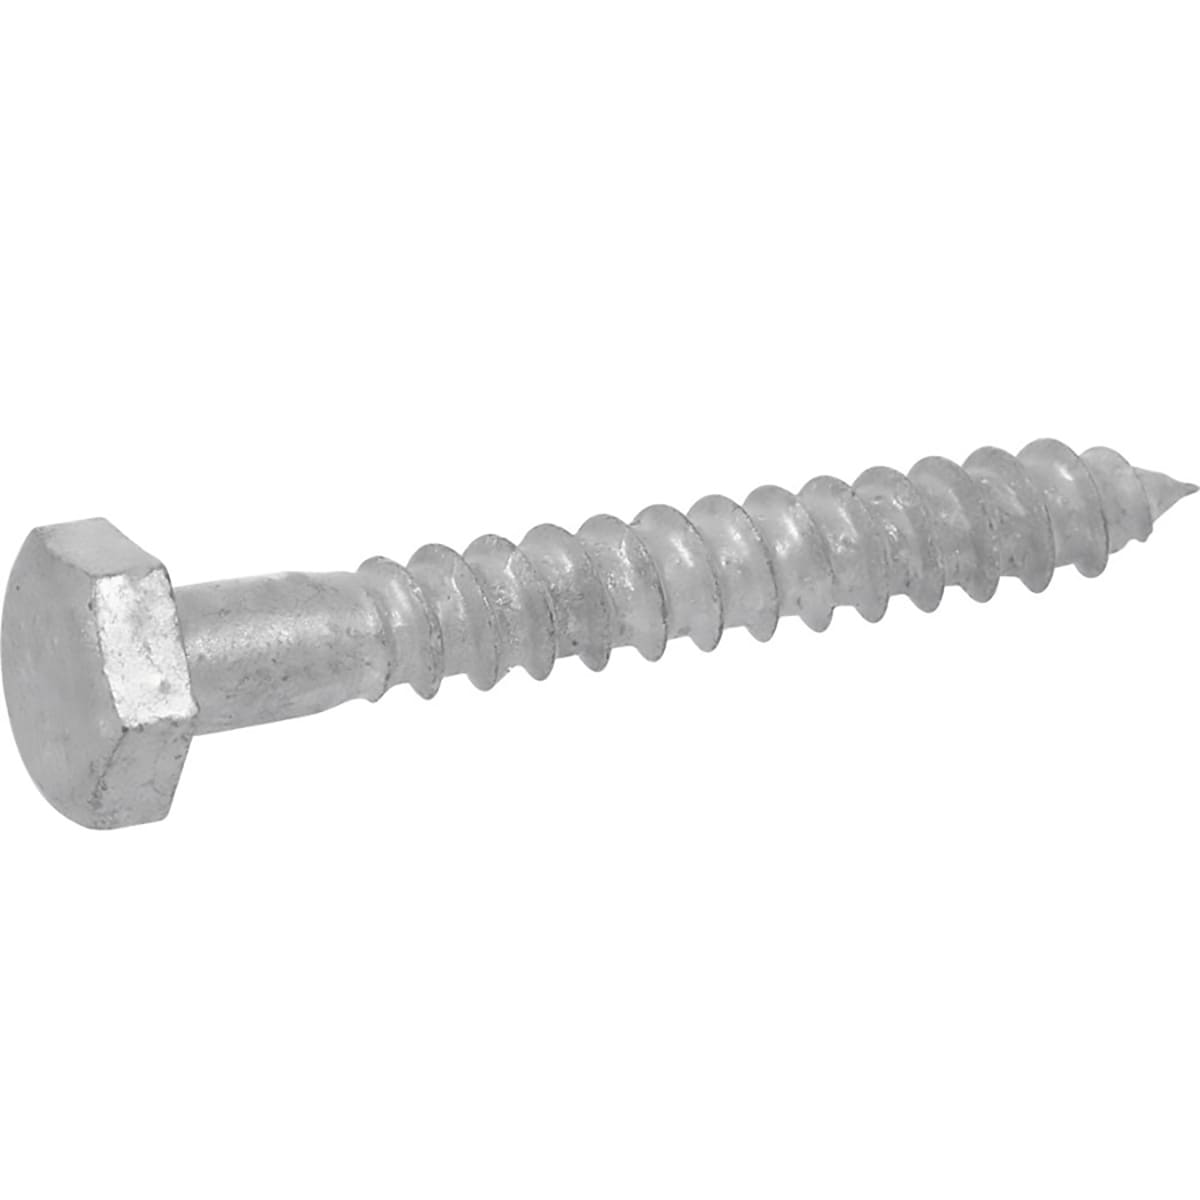 778 Pieces 1/4 x 1-1/2 Tan Coated Steel Star Drive Construction Lag Screw 